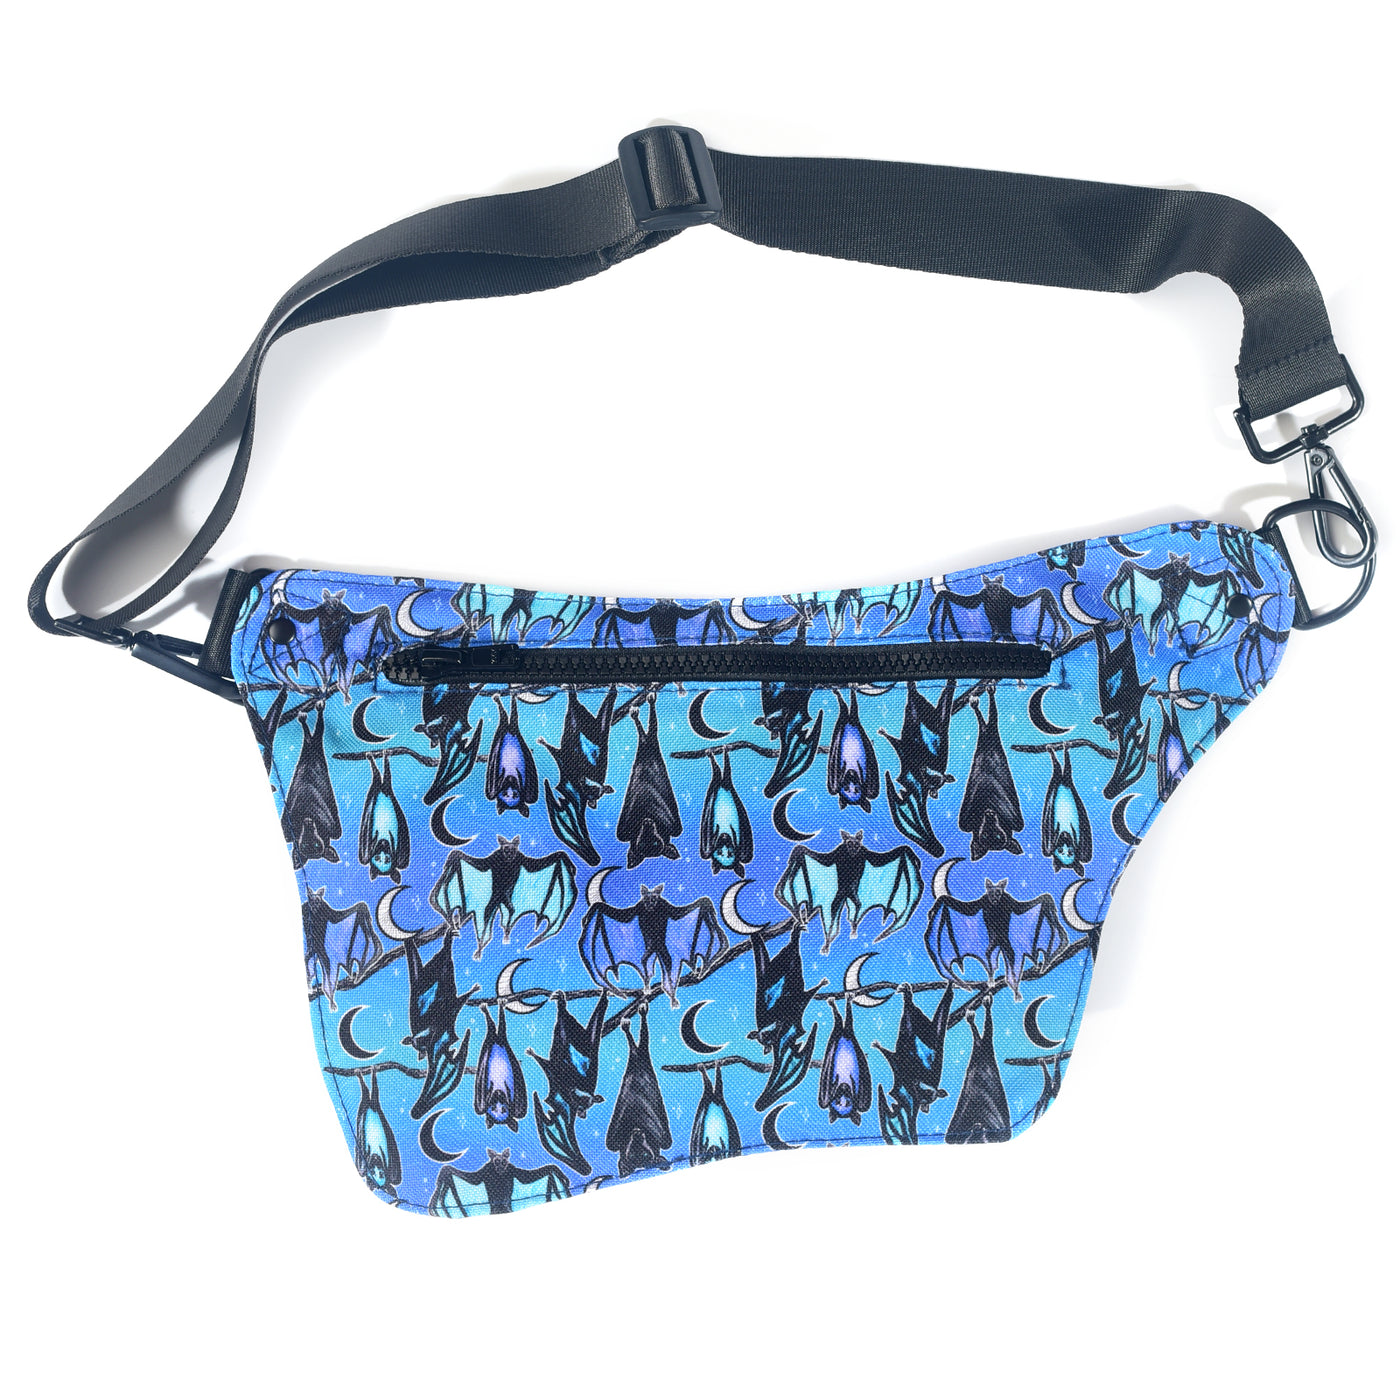 Sipsey Wilder Cool Cats Hip Bag Size 2 (M-XL) 33-46